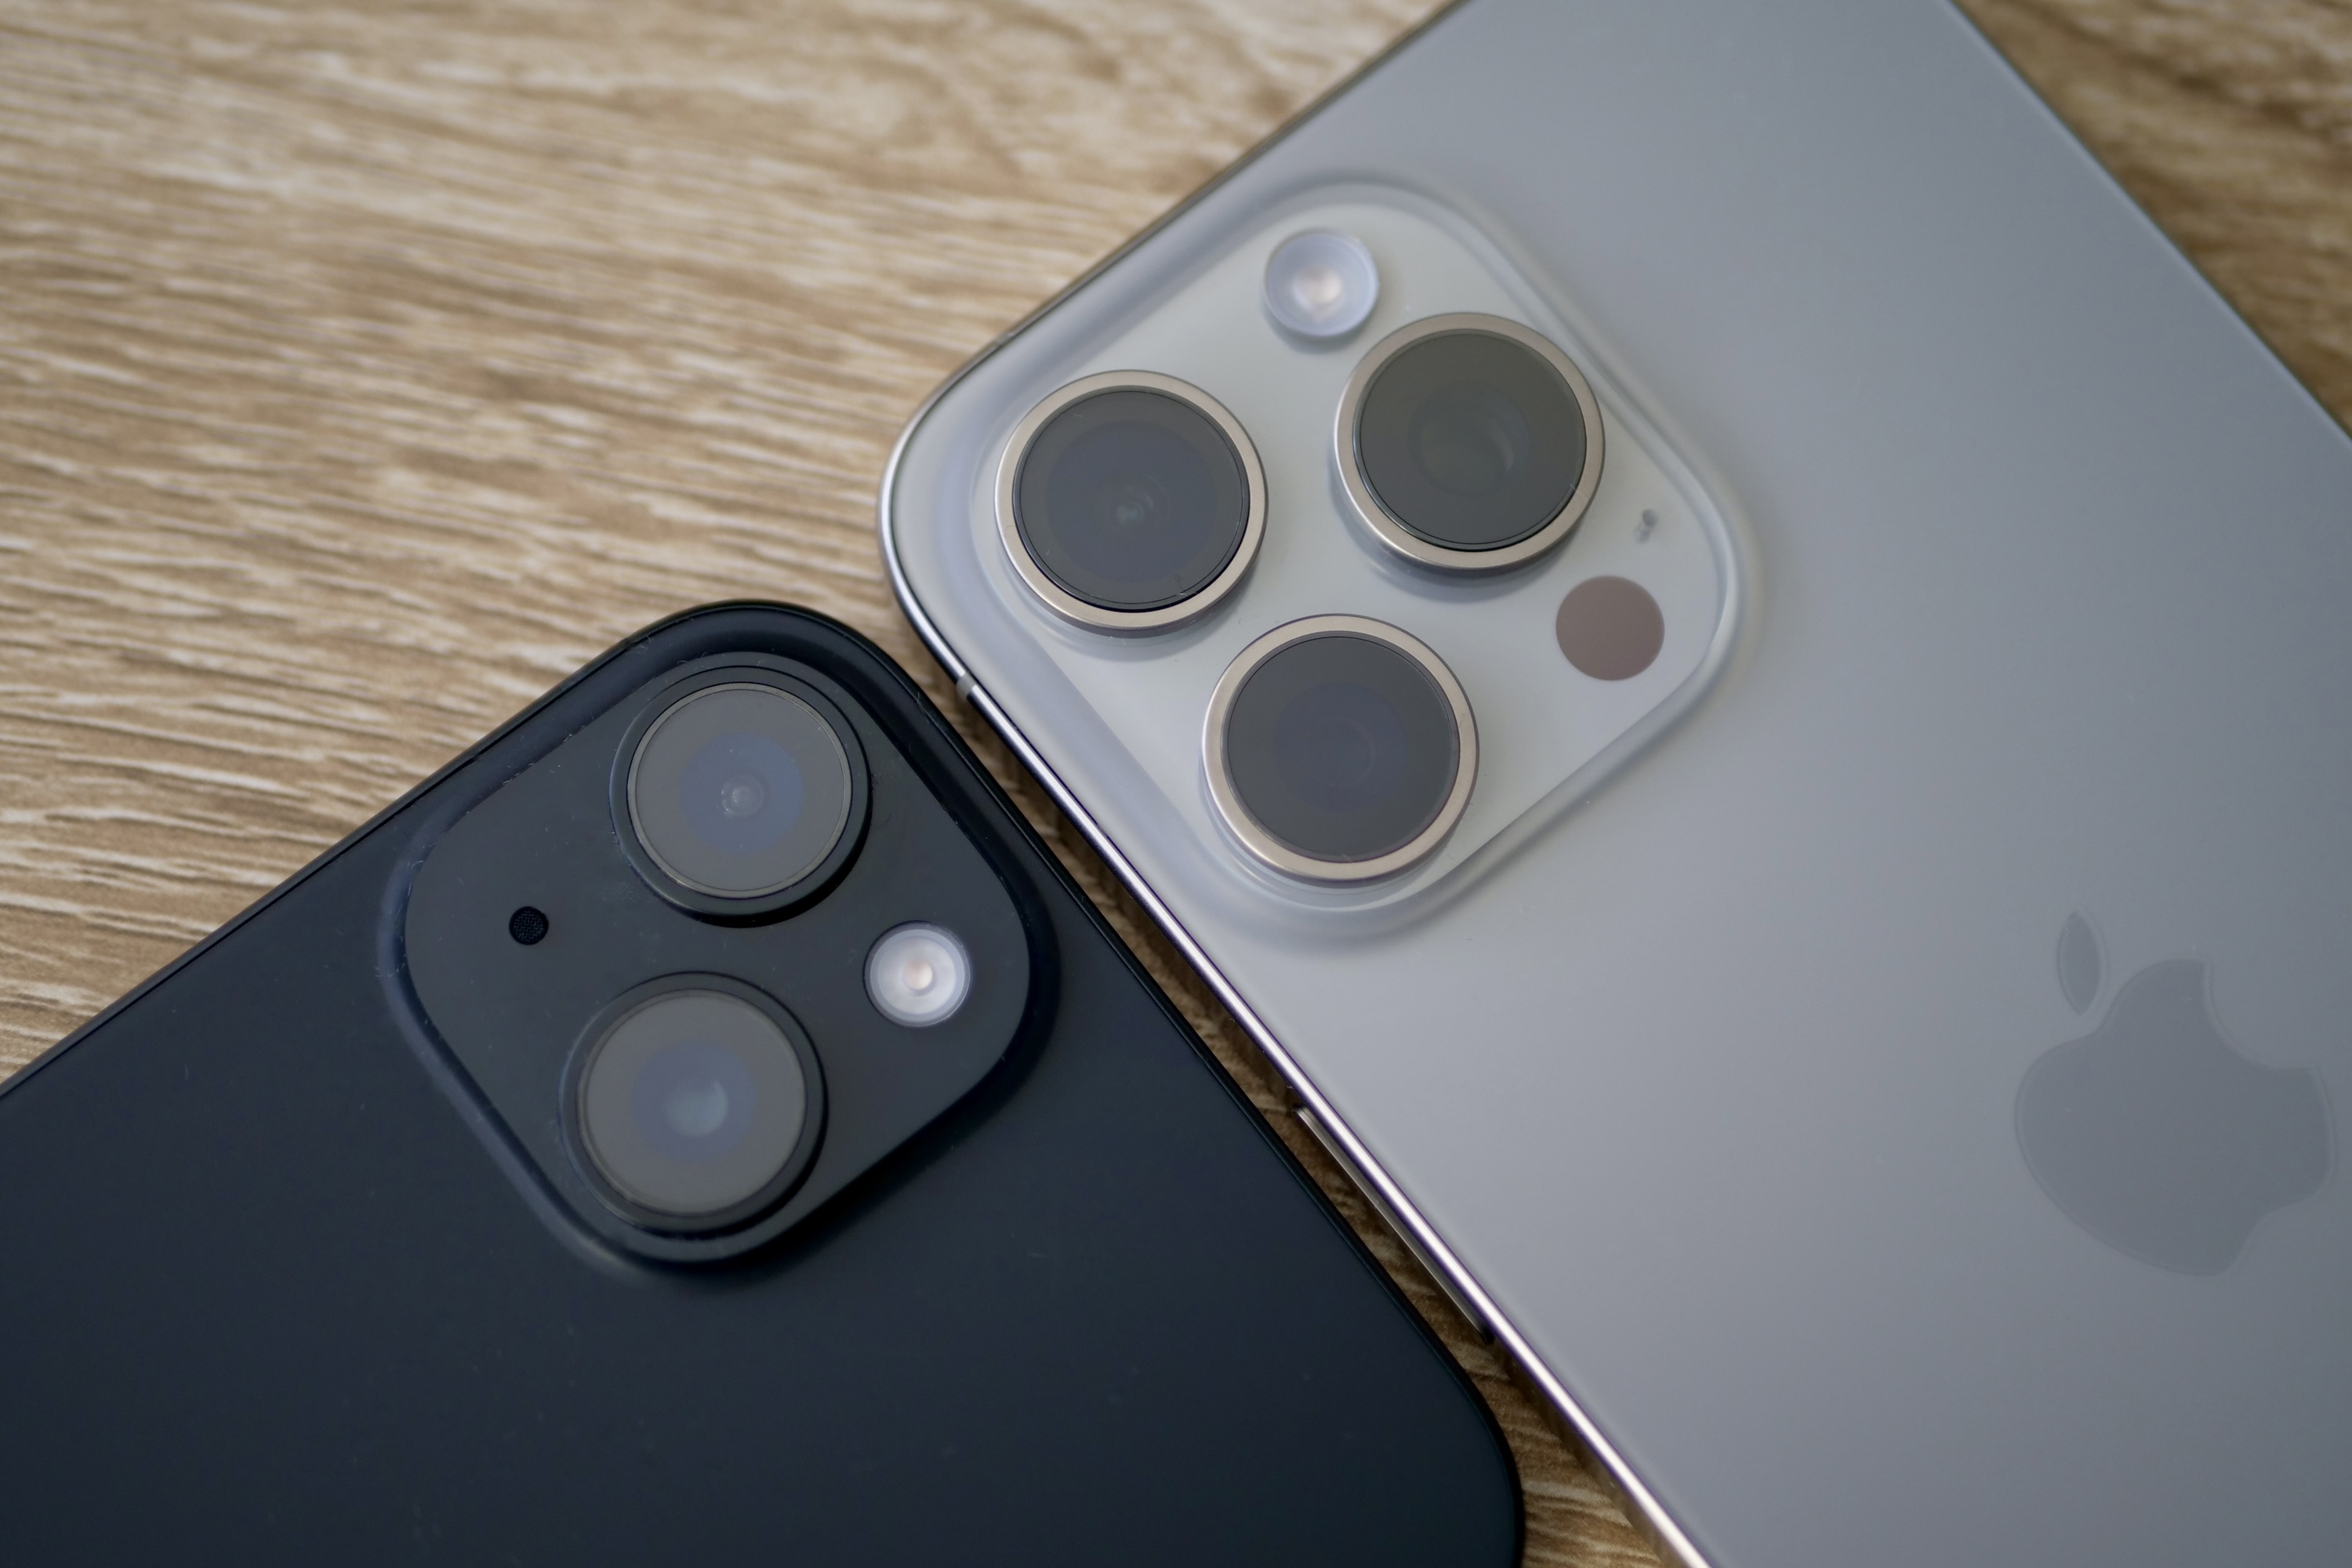 iPhone 15 Pro Max 'Tetraprism' Means Better 5x Telephoto Camera - CNET